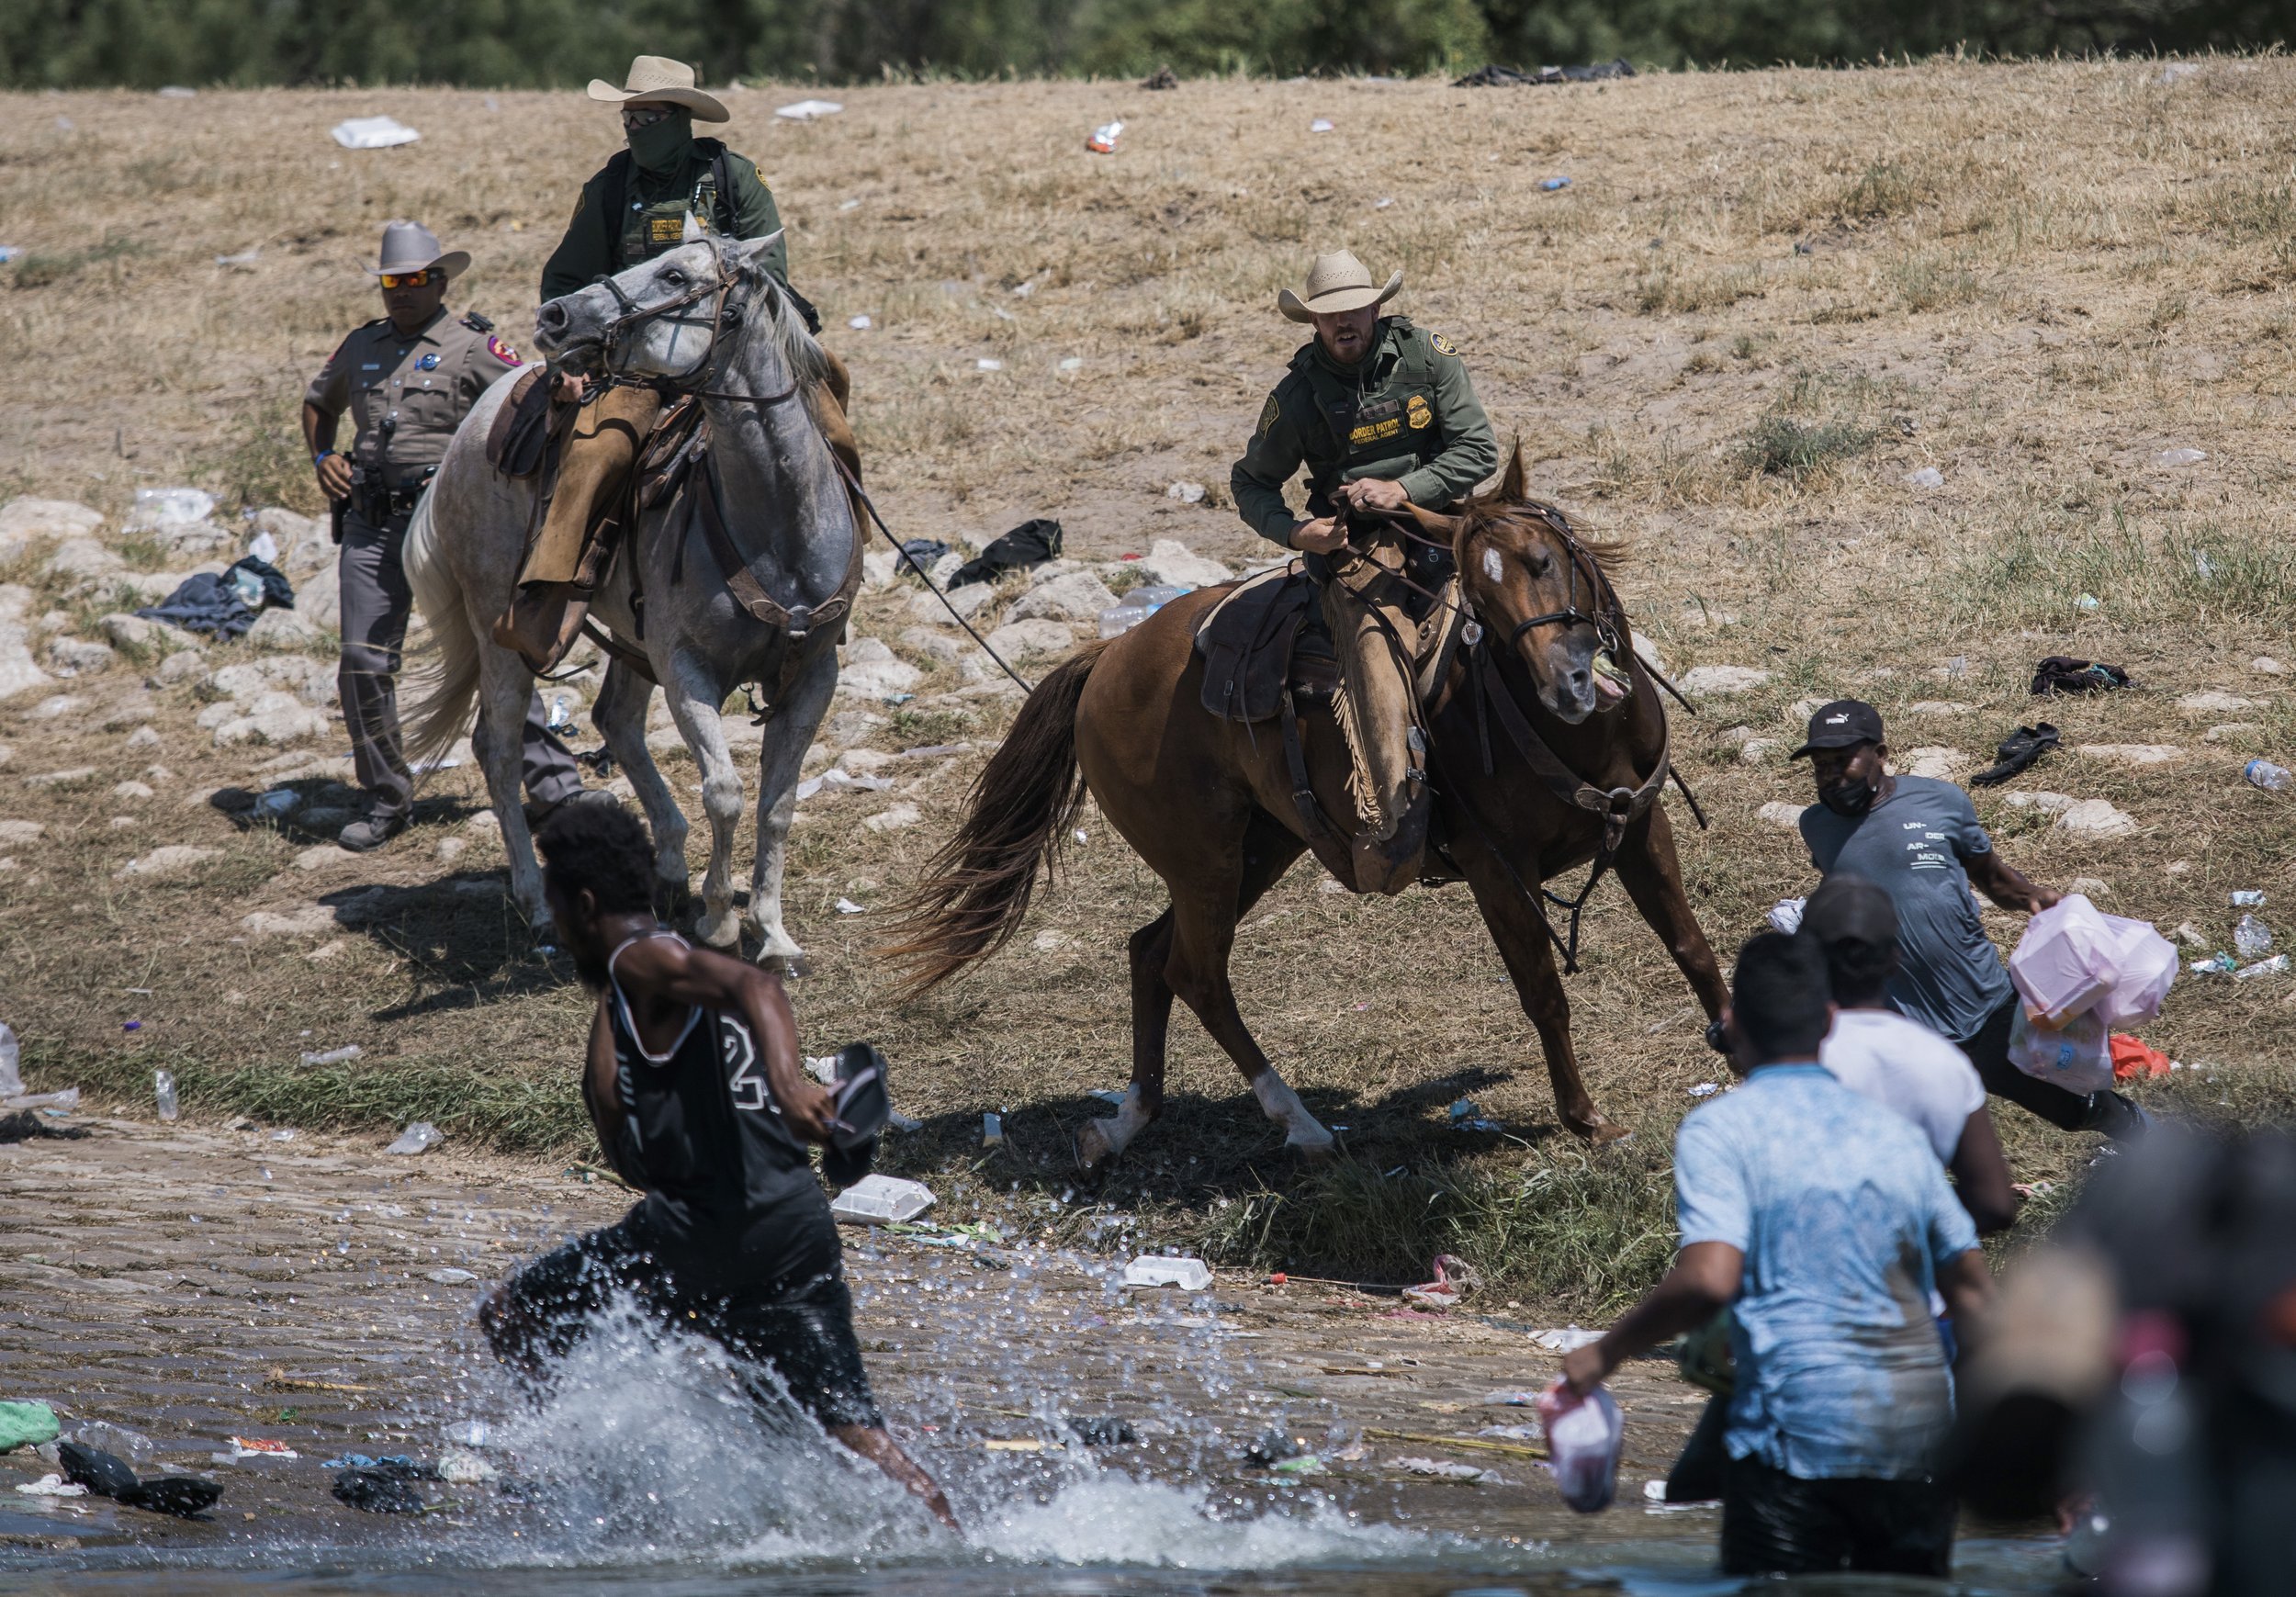  U.S. Customs and Border Protection mounted officers attempt to contain migrants, mostly from Haiti, as they cross the Rio Grande from Ciudad Acuña, Mexico, into Del Rio, Texas, on Sept. 19, 2021. (AP Photo/Felix Marquez) 